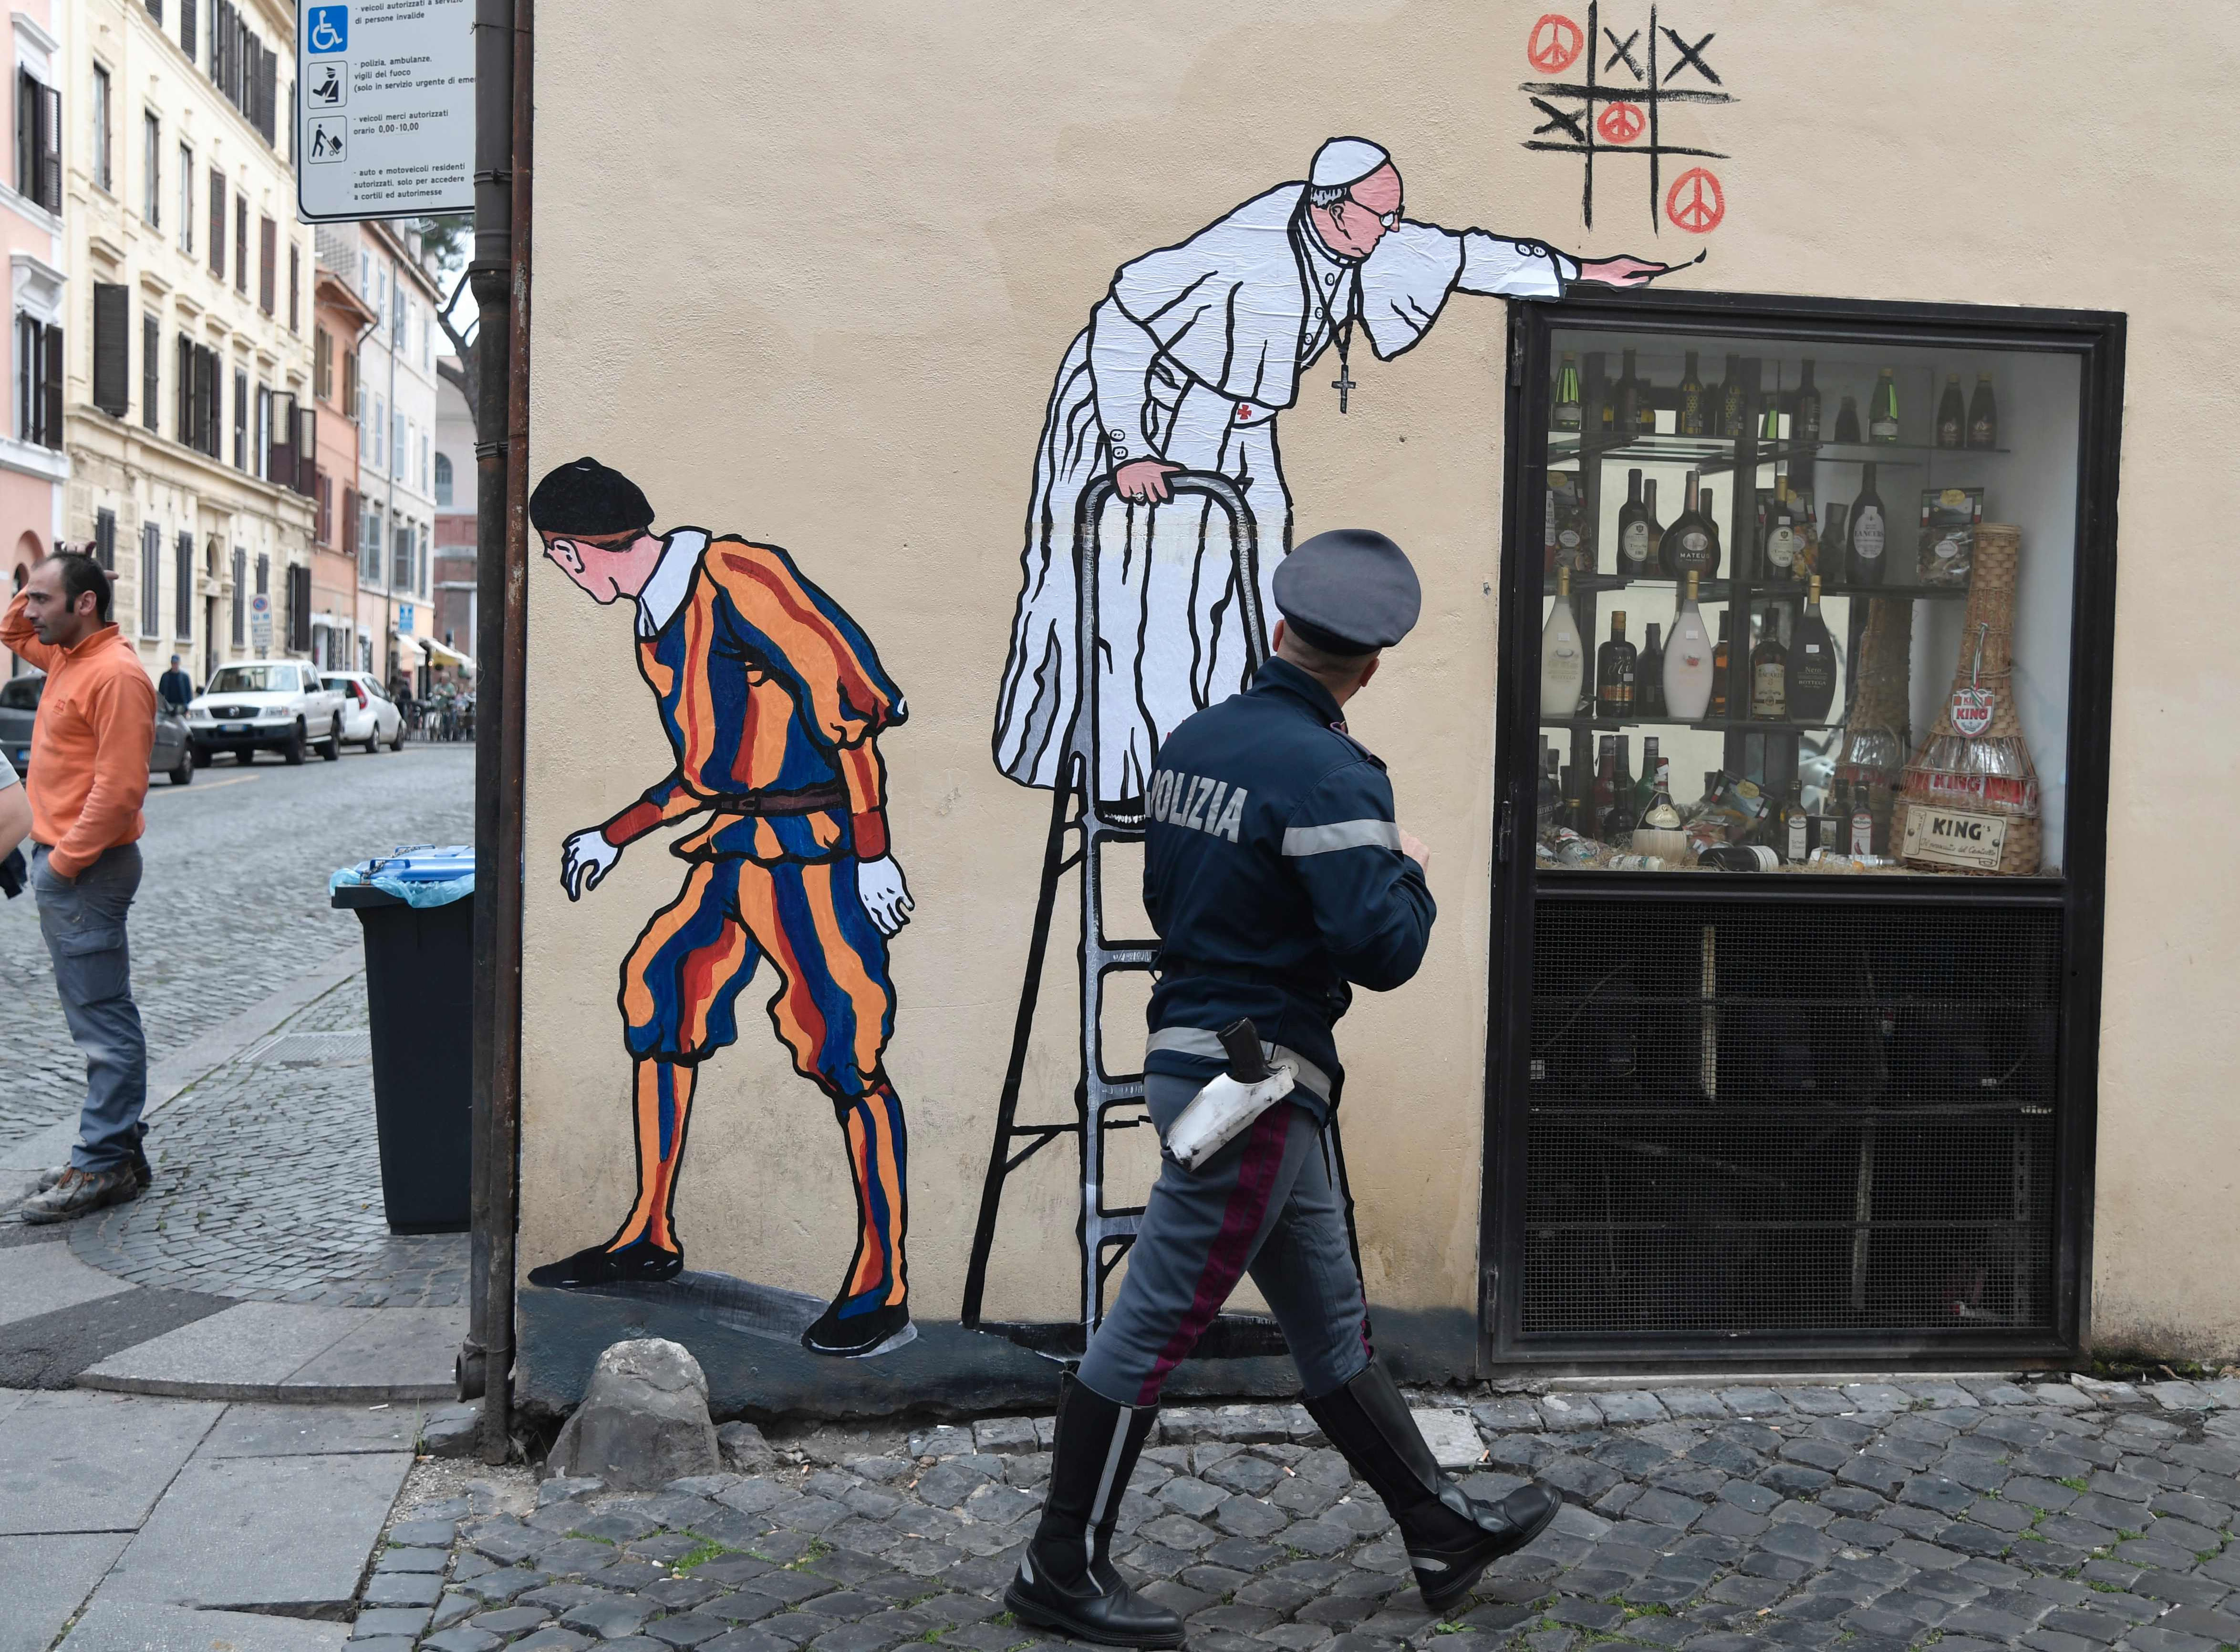 A policeman watches a new street-art collage by Italian artist Maupal showing Pope Francis playing tic-tac-toe and drawing peace signs as a Swiss guard keep watches the street near the Vatican on October 19, 2016 in Rome. / AFP PHOTO / TIZIANA FABITIZIANA FABI/AFP/Getty Images